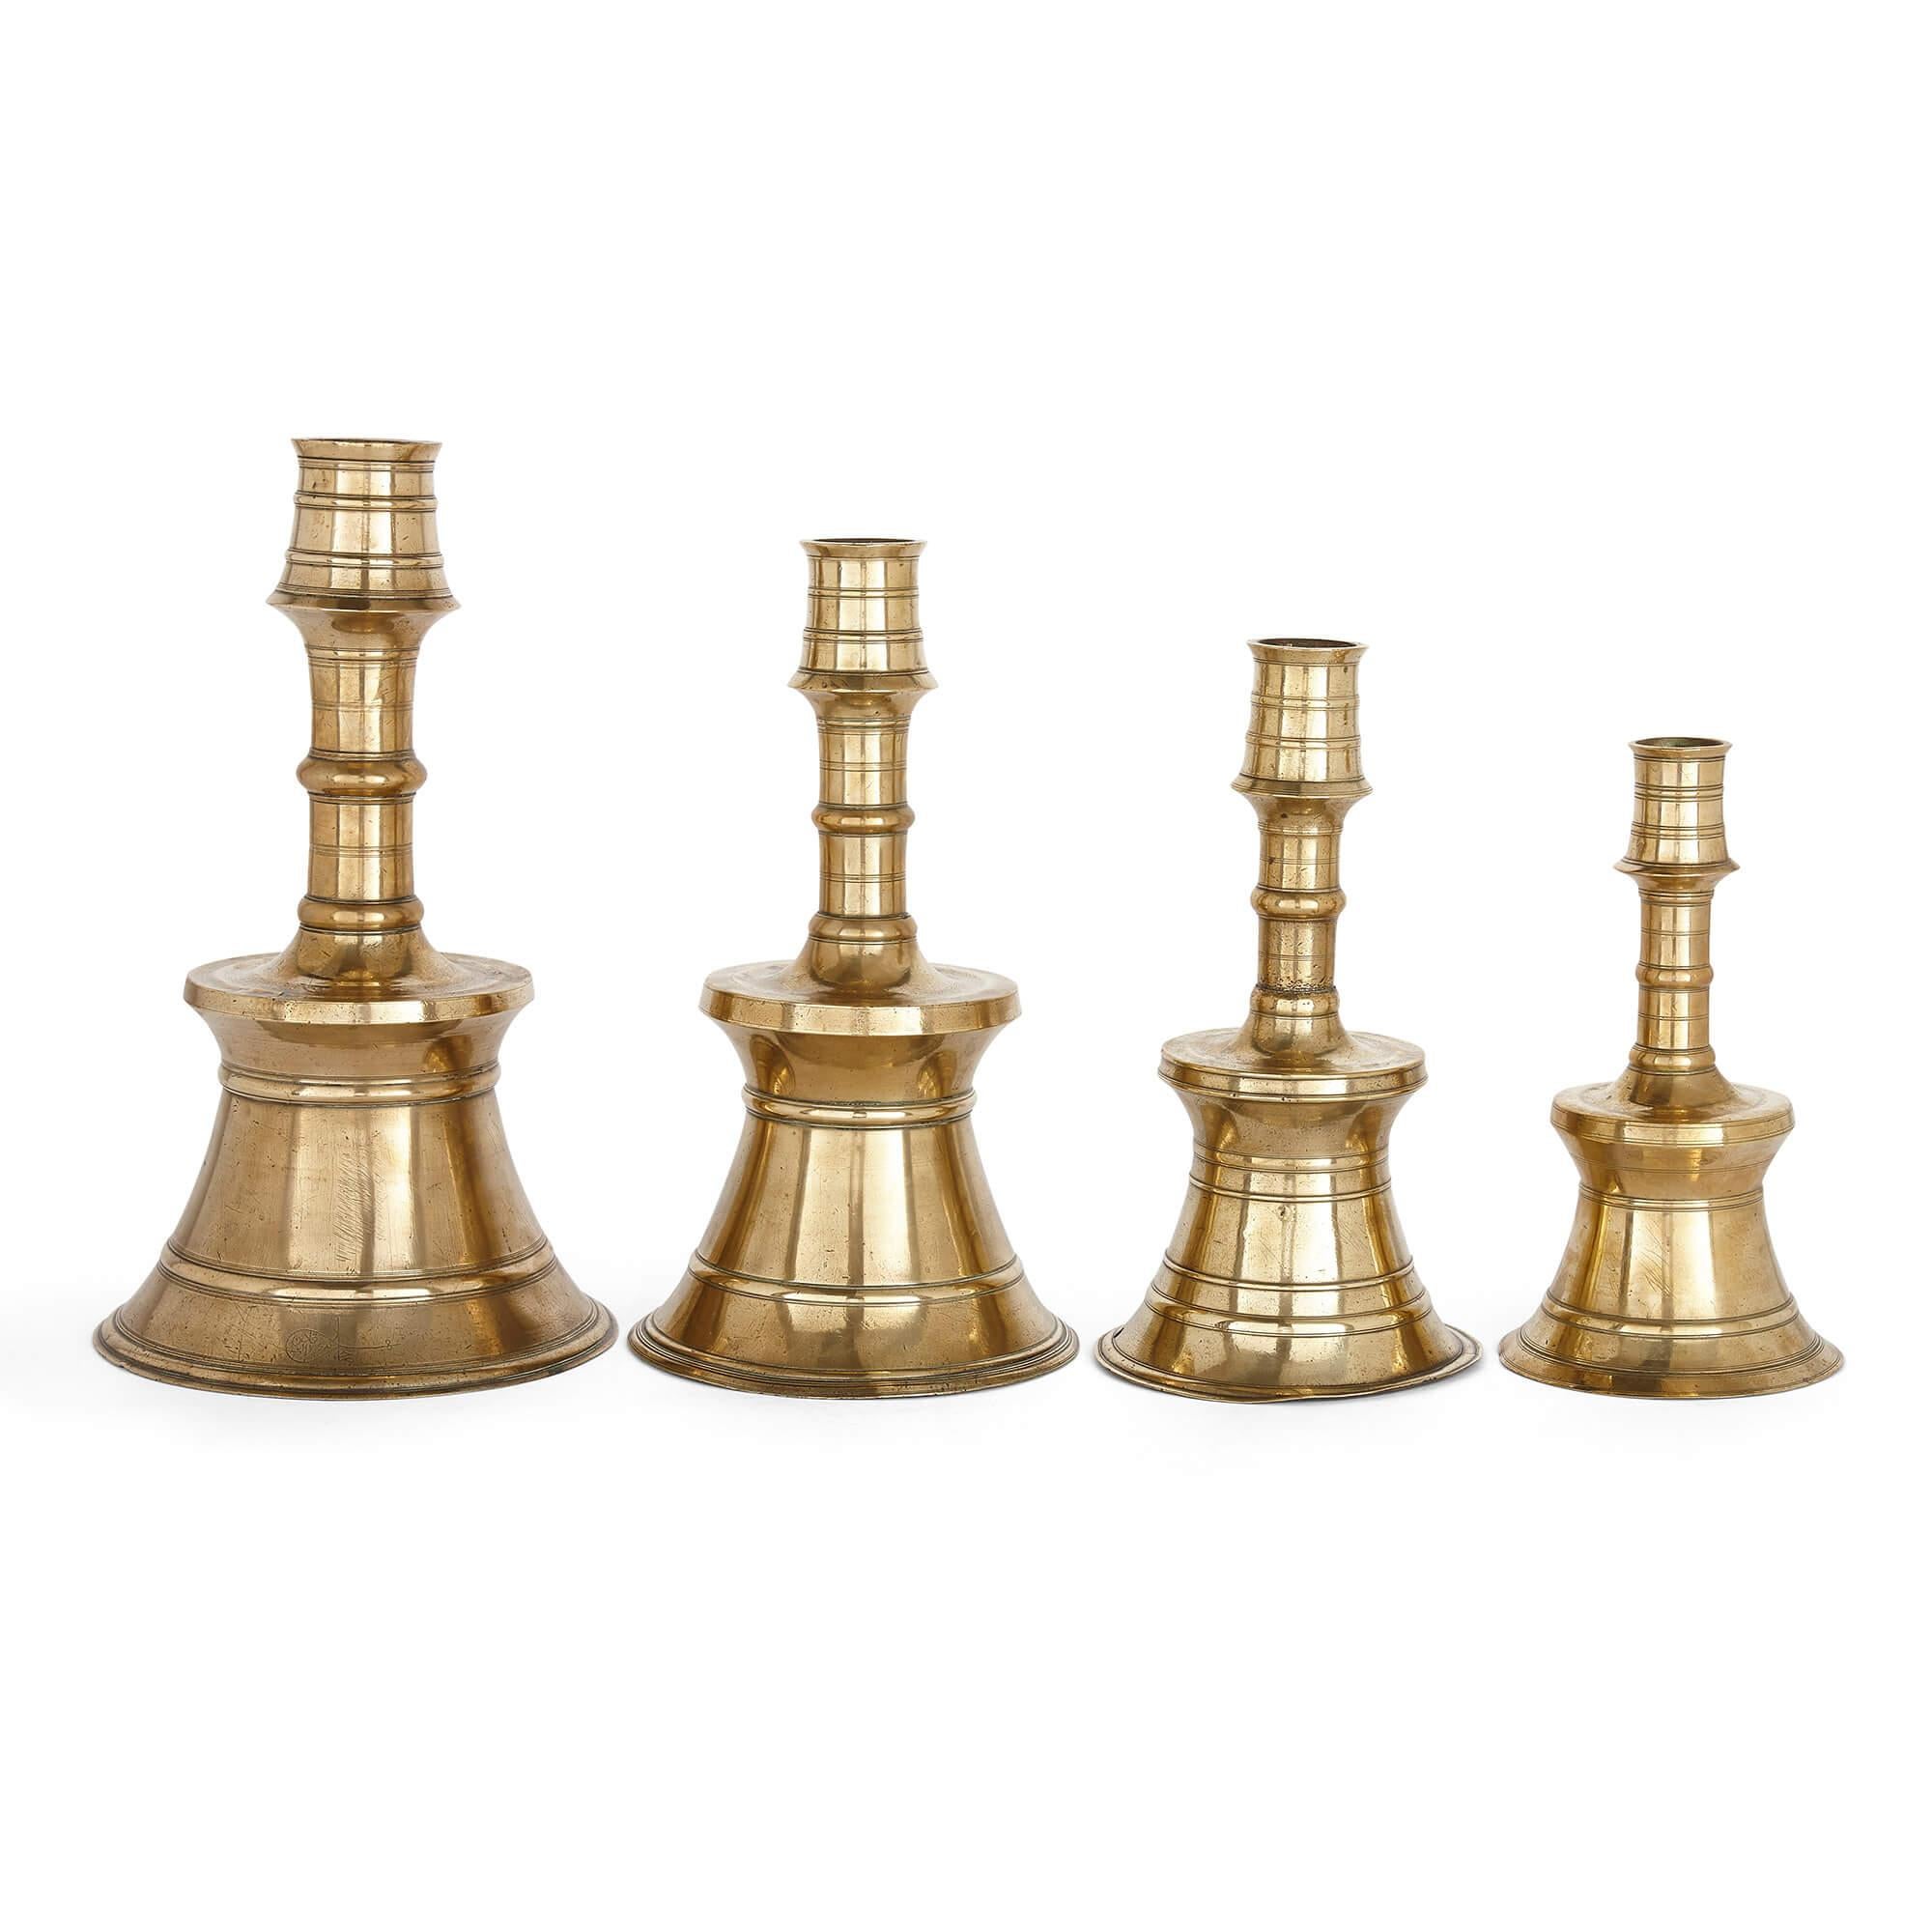 Set of four cast and turned brass ottoman candlesticks
Turkish, 16th century
Measures: Largest: Height 41.5cm, diameter 24cm
Smallest: Height 28cm, diameter 16cm

The four ottoman brass candlesticks in this set are of traditional form. Each